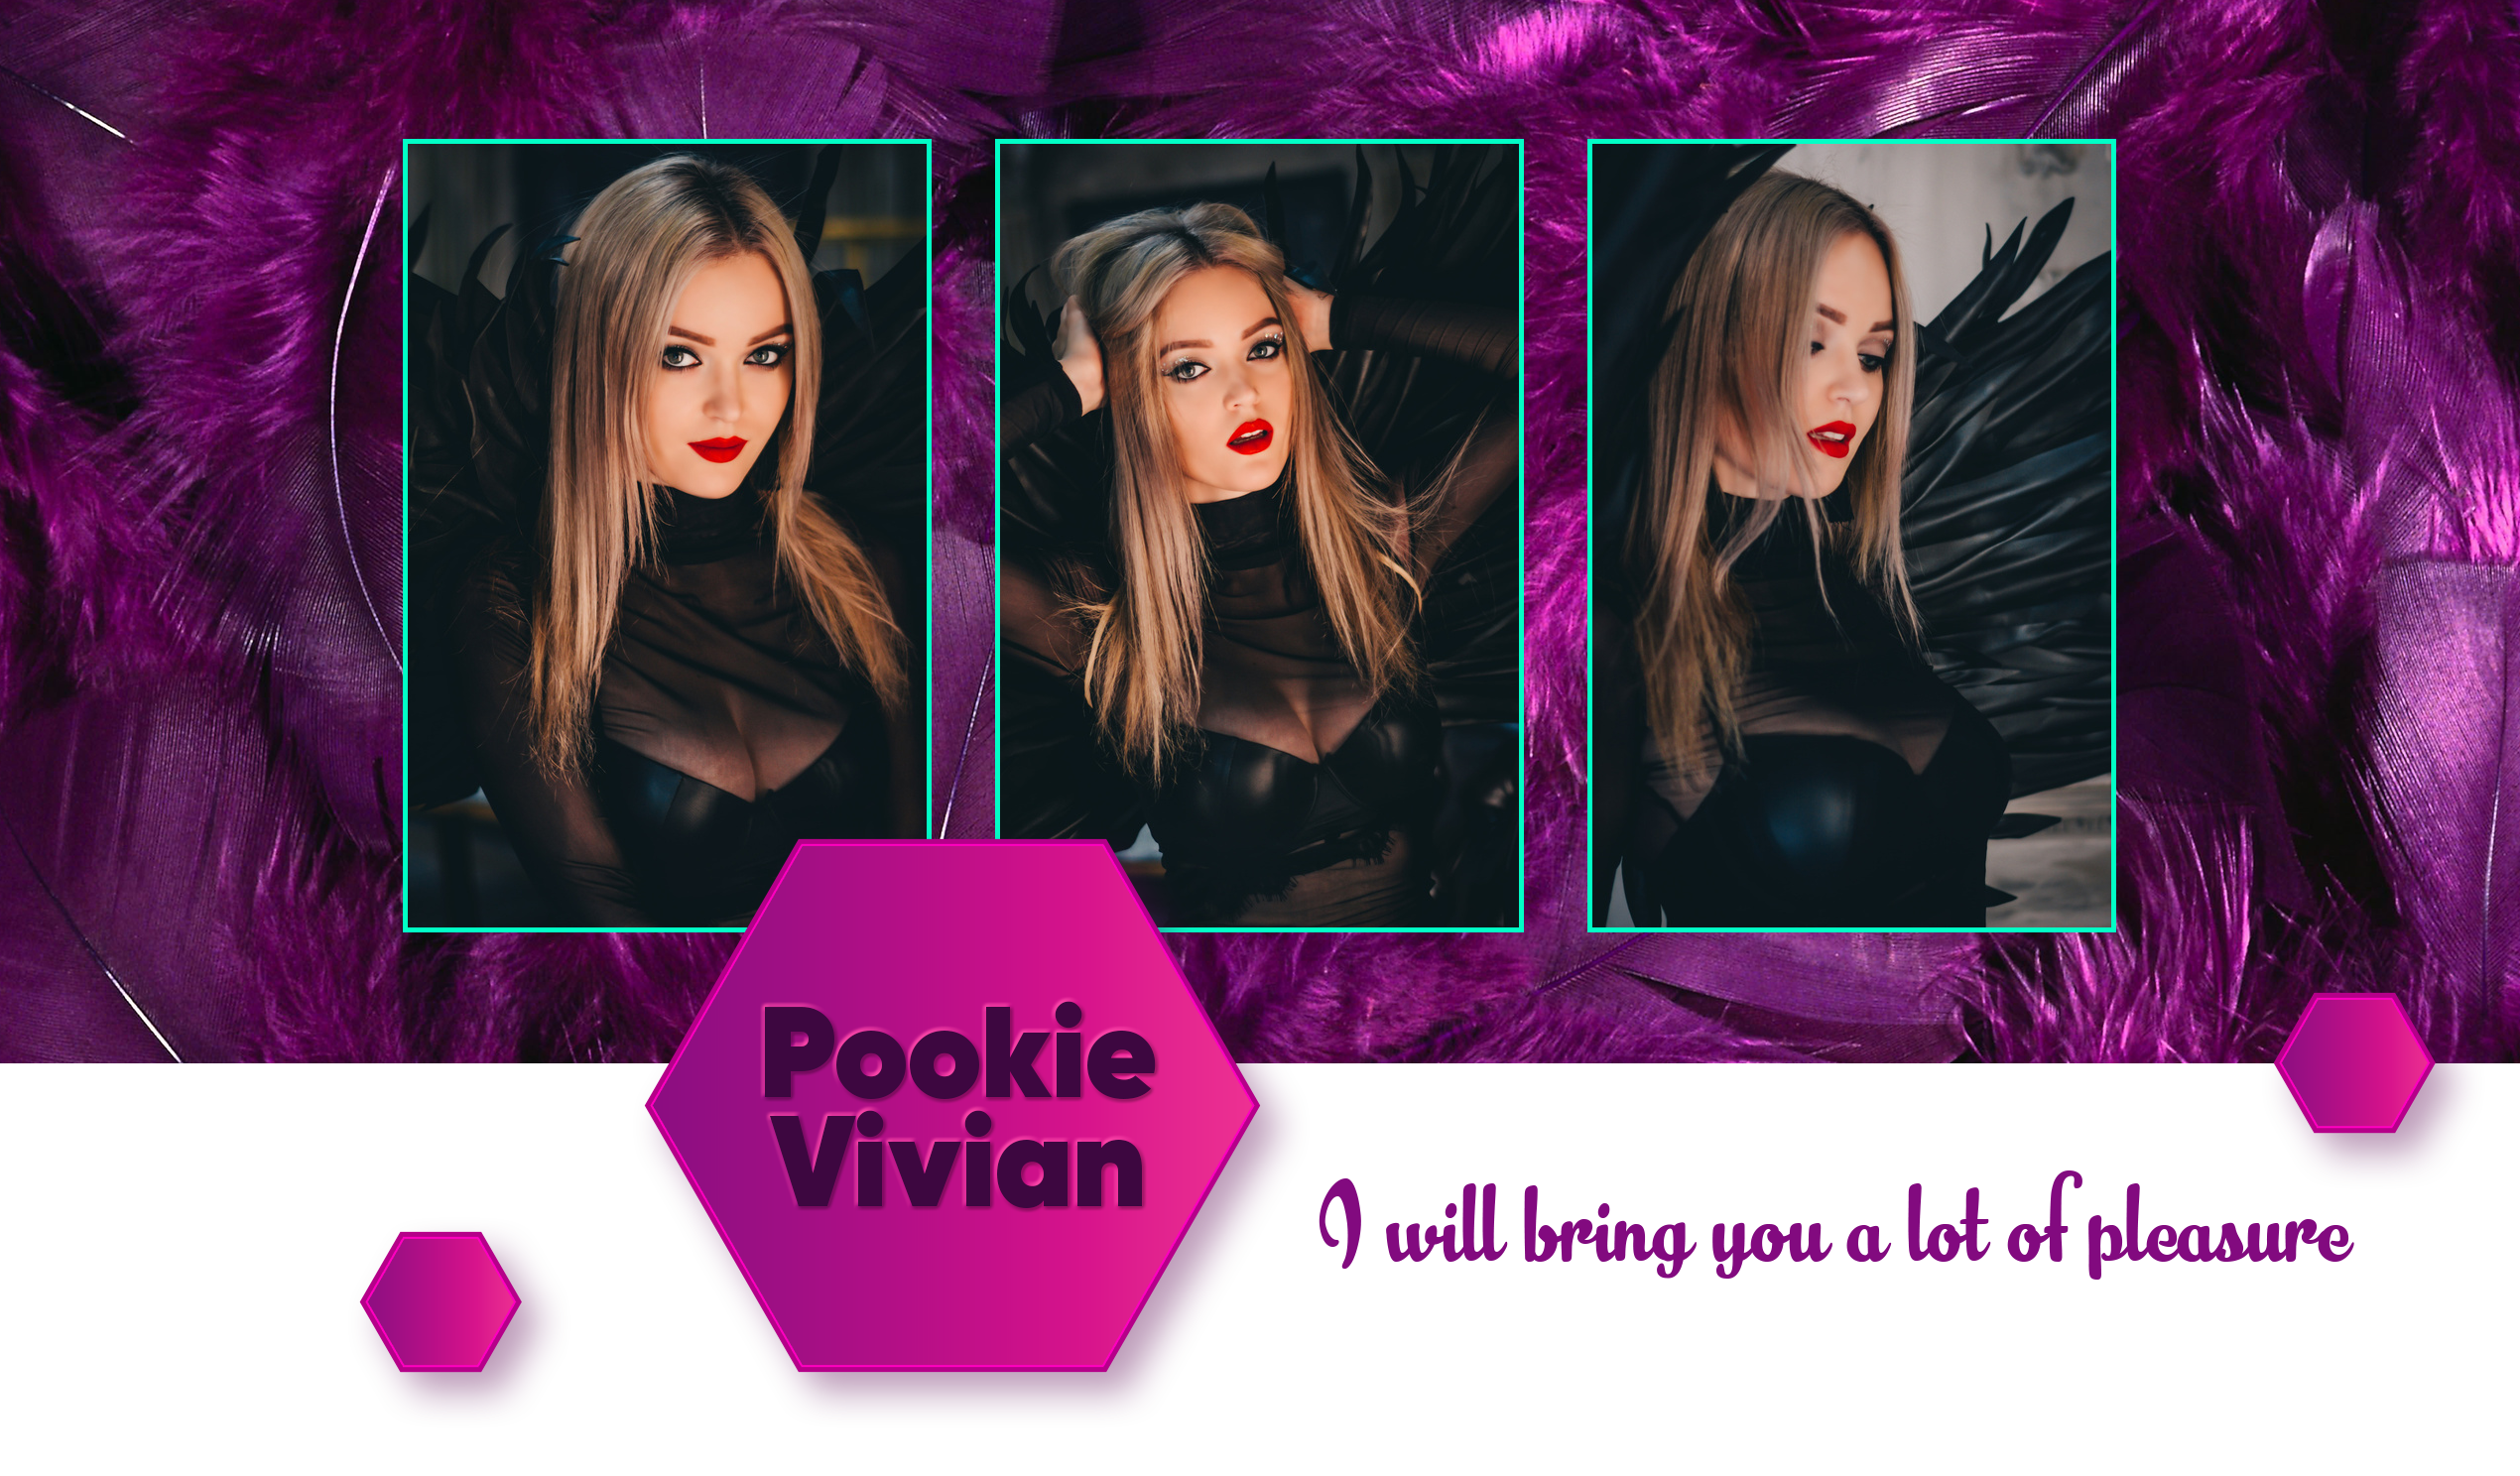 PookieVivian Hello! Welcome to my page! image: 1